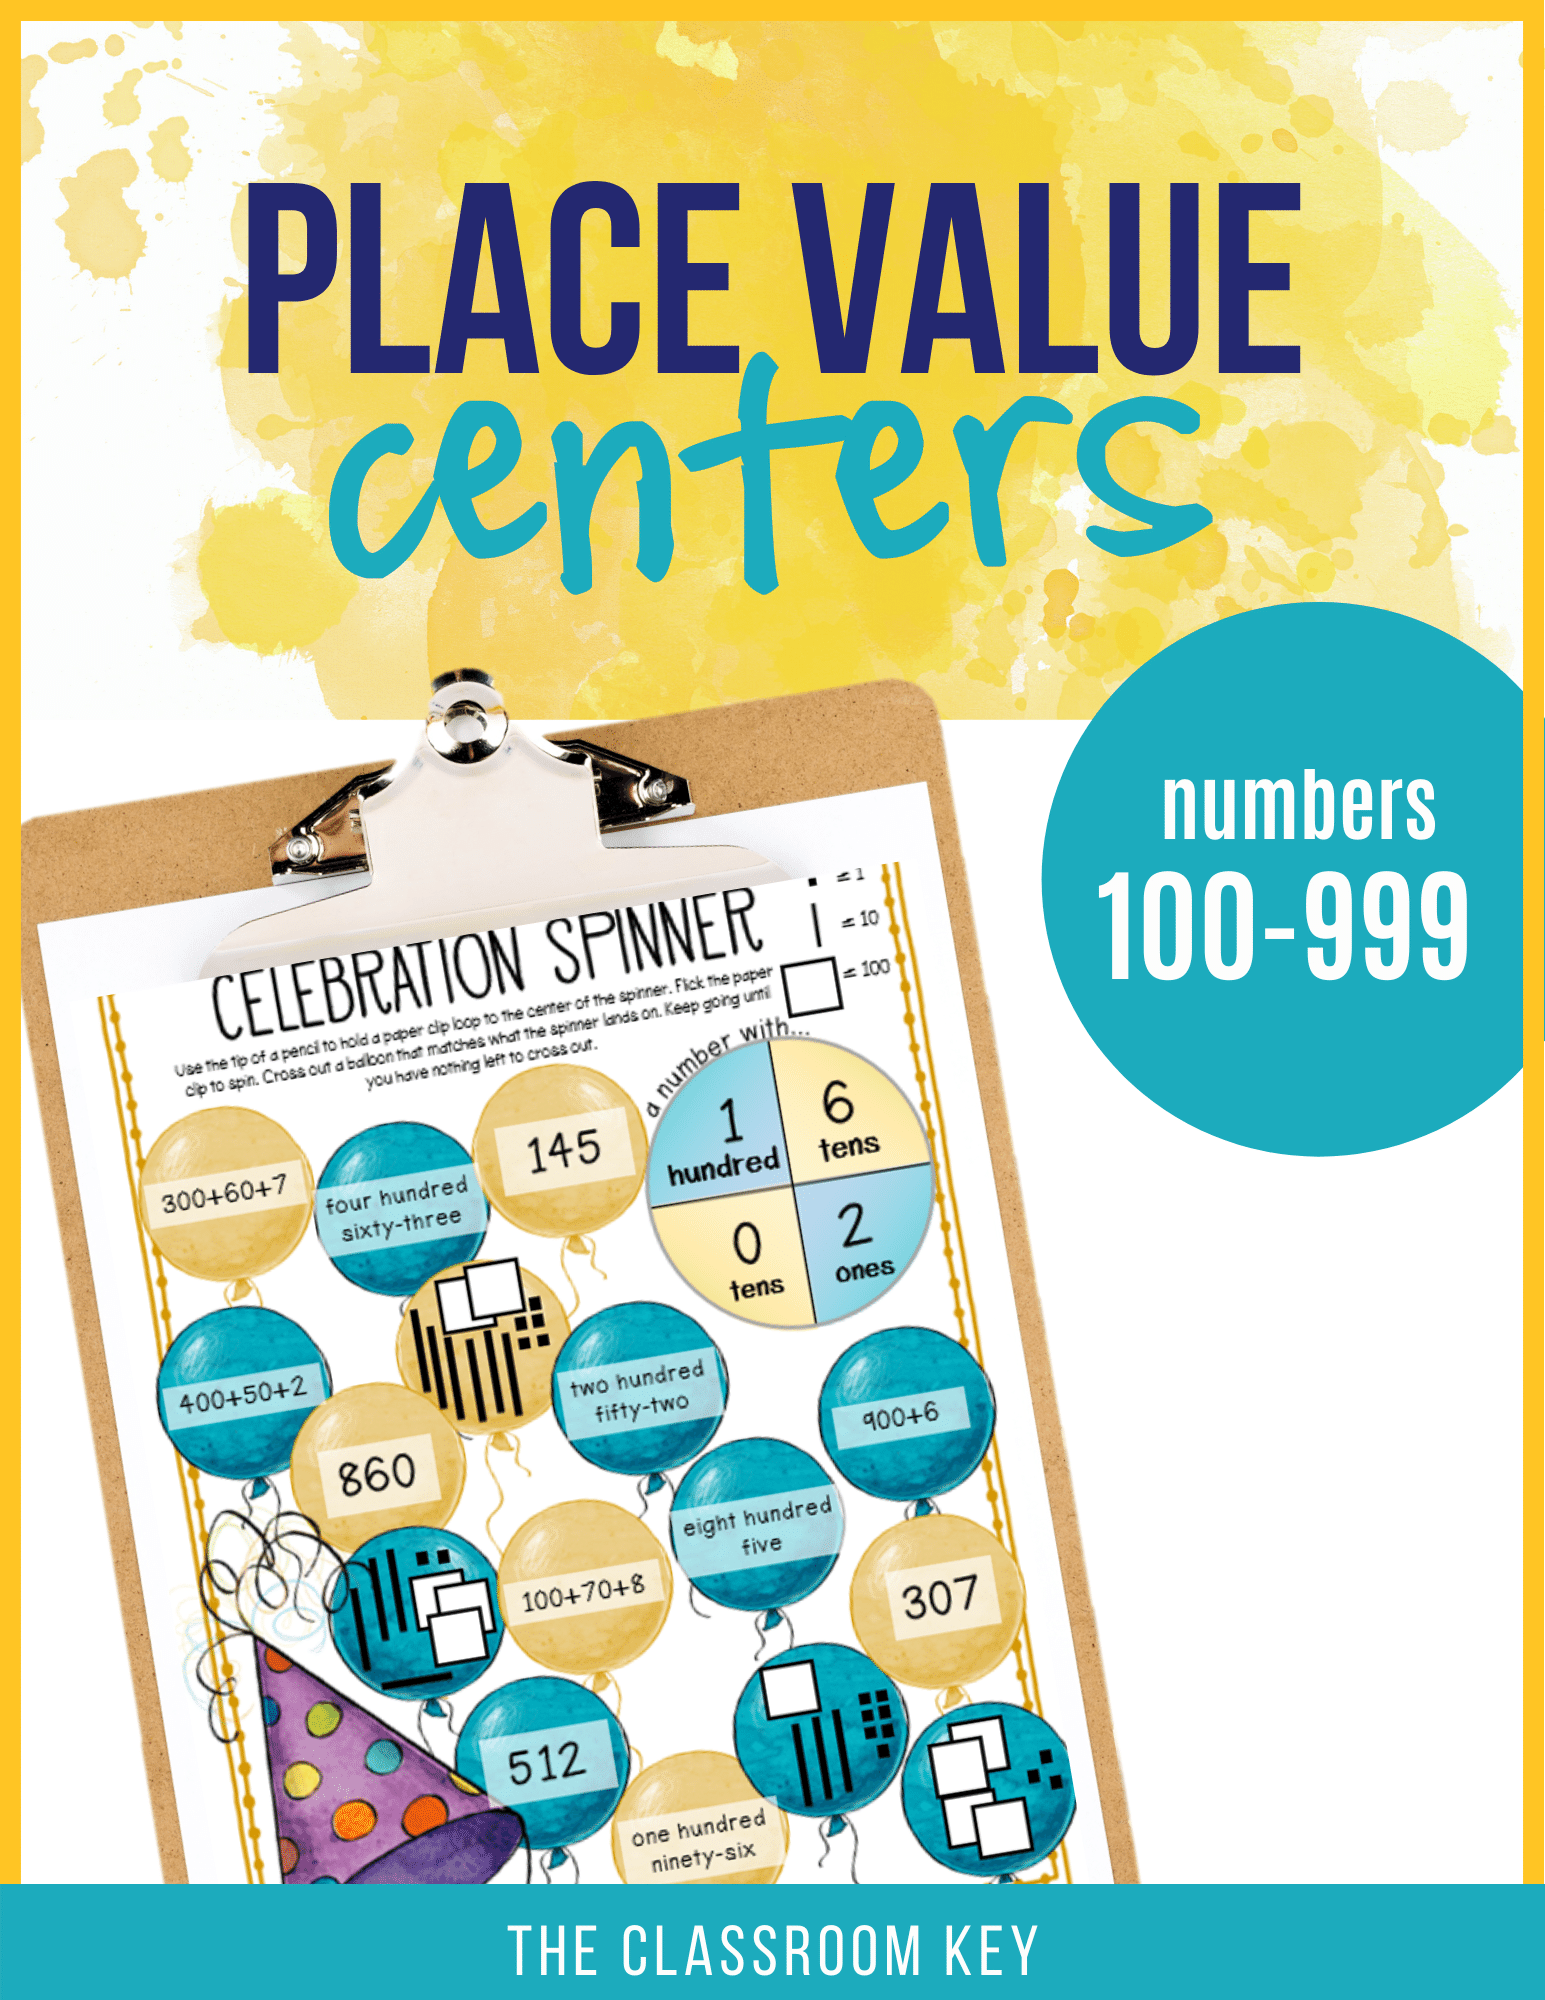 Teach place value concepts for 3-digit numbers with this set of 25 engaging math center activities. Prep is easy! Just print and laminate or place in a wipe-off pouch. Perfect for 2nd grade. Addresses Common Core standards 2.NBT.A.1 and 2.NBT.A.3